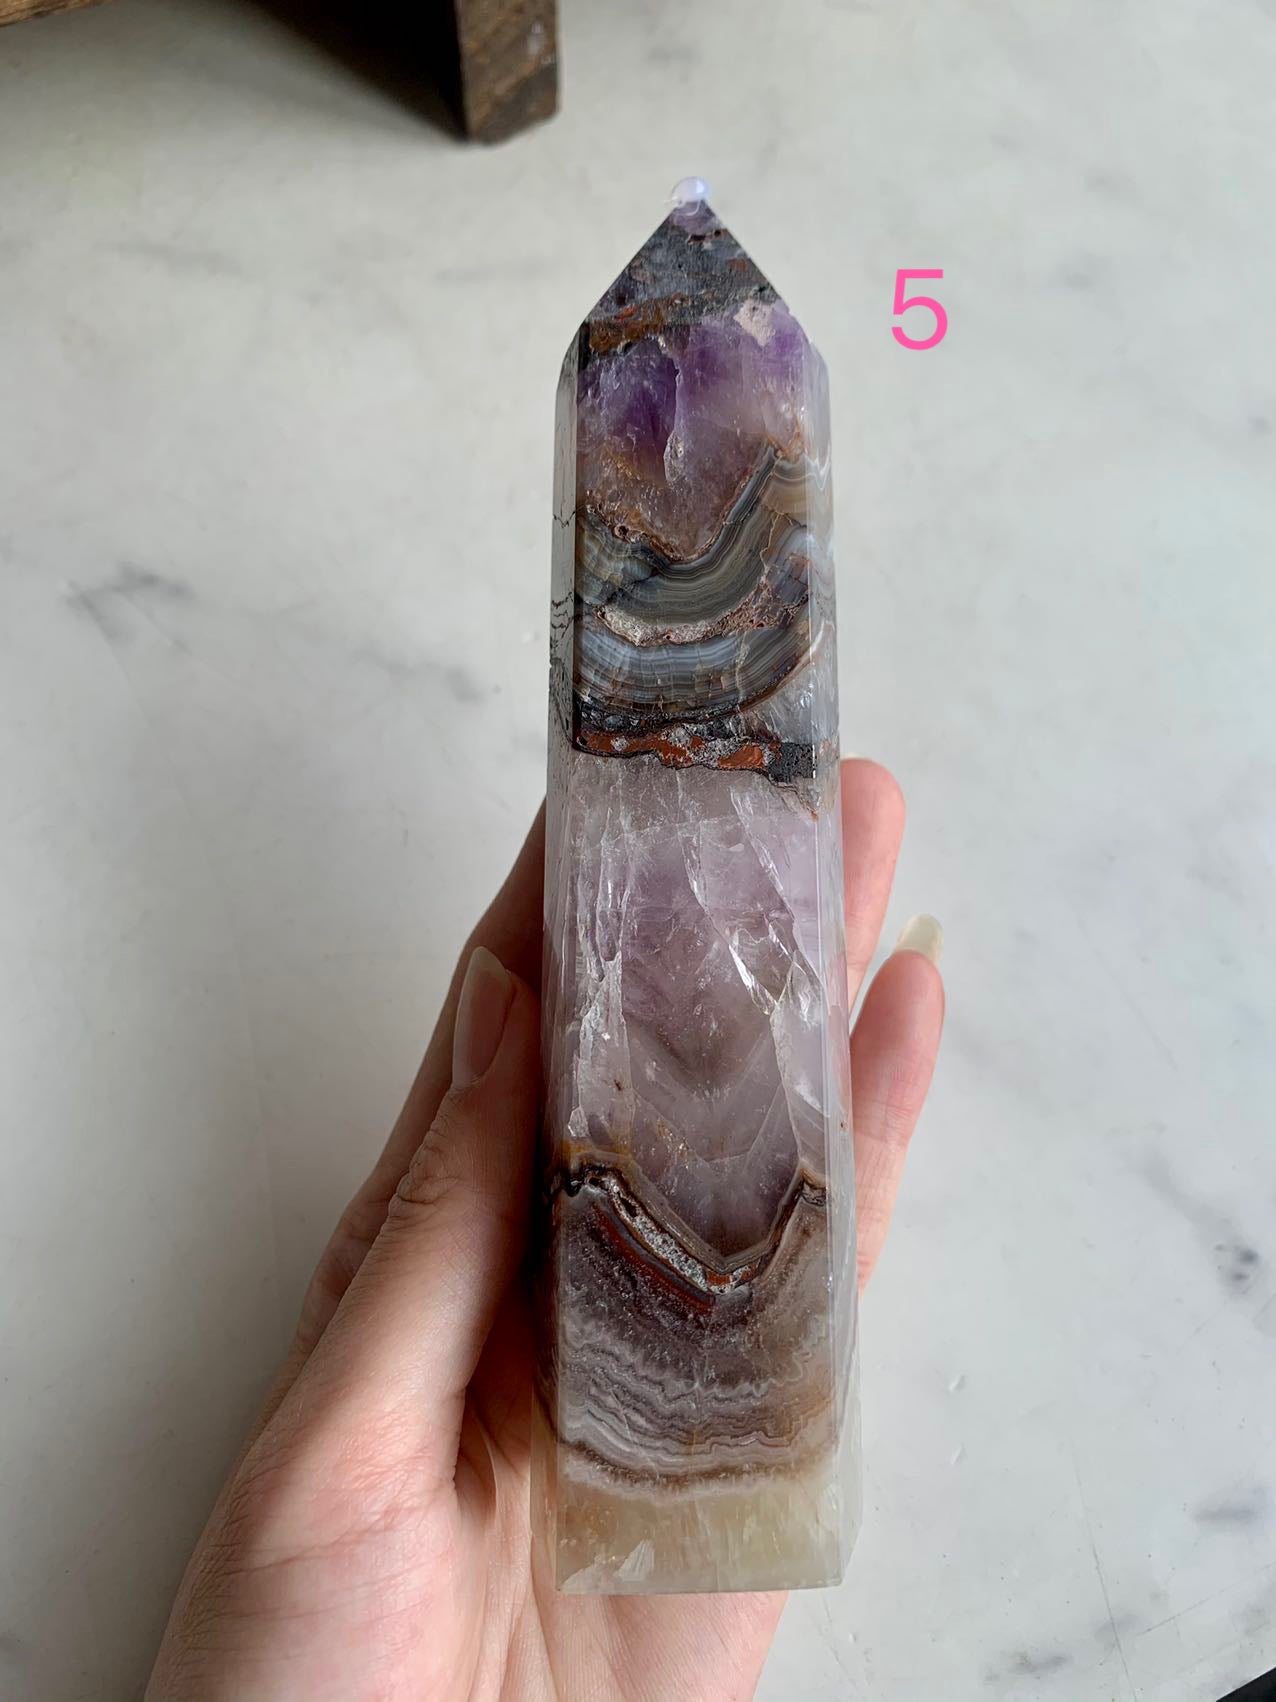 【Weekly Flash Deals】Amethyst With Mexico Sardonyx Tower 1